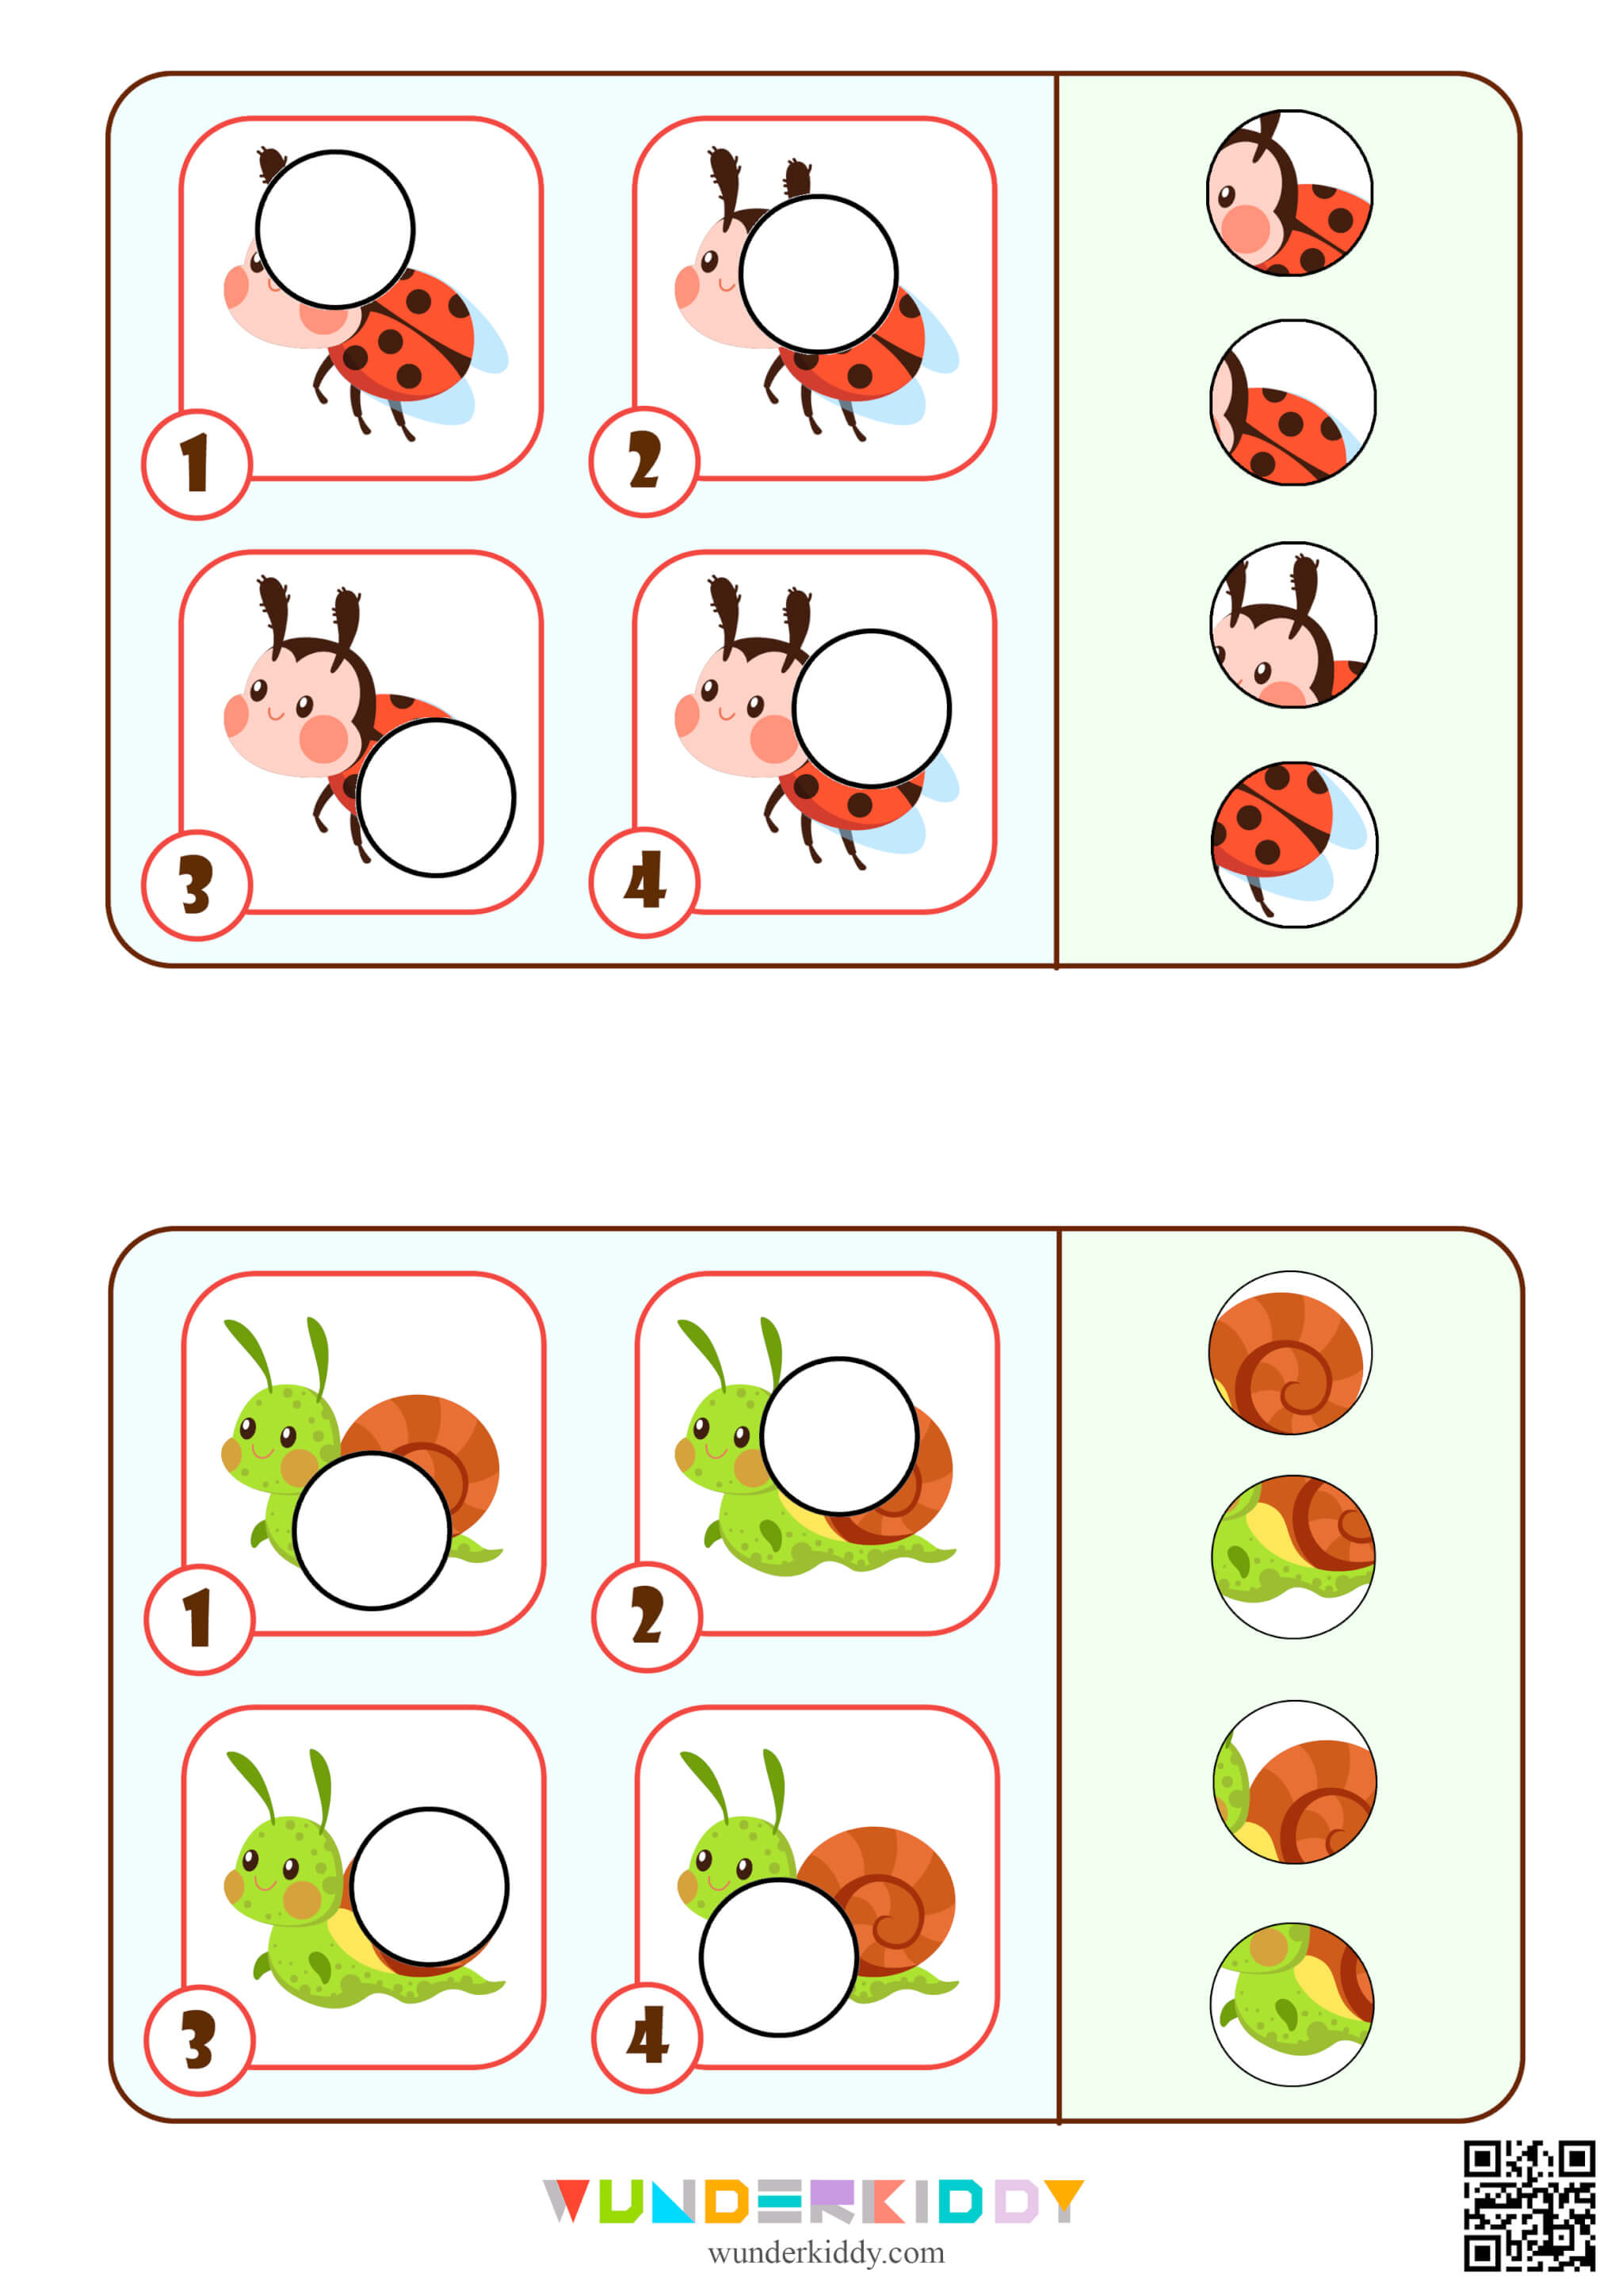 Find Missing Pieces Puzzle Insects - Image 2